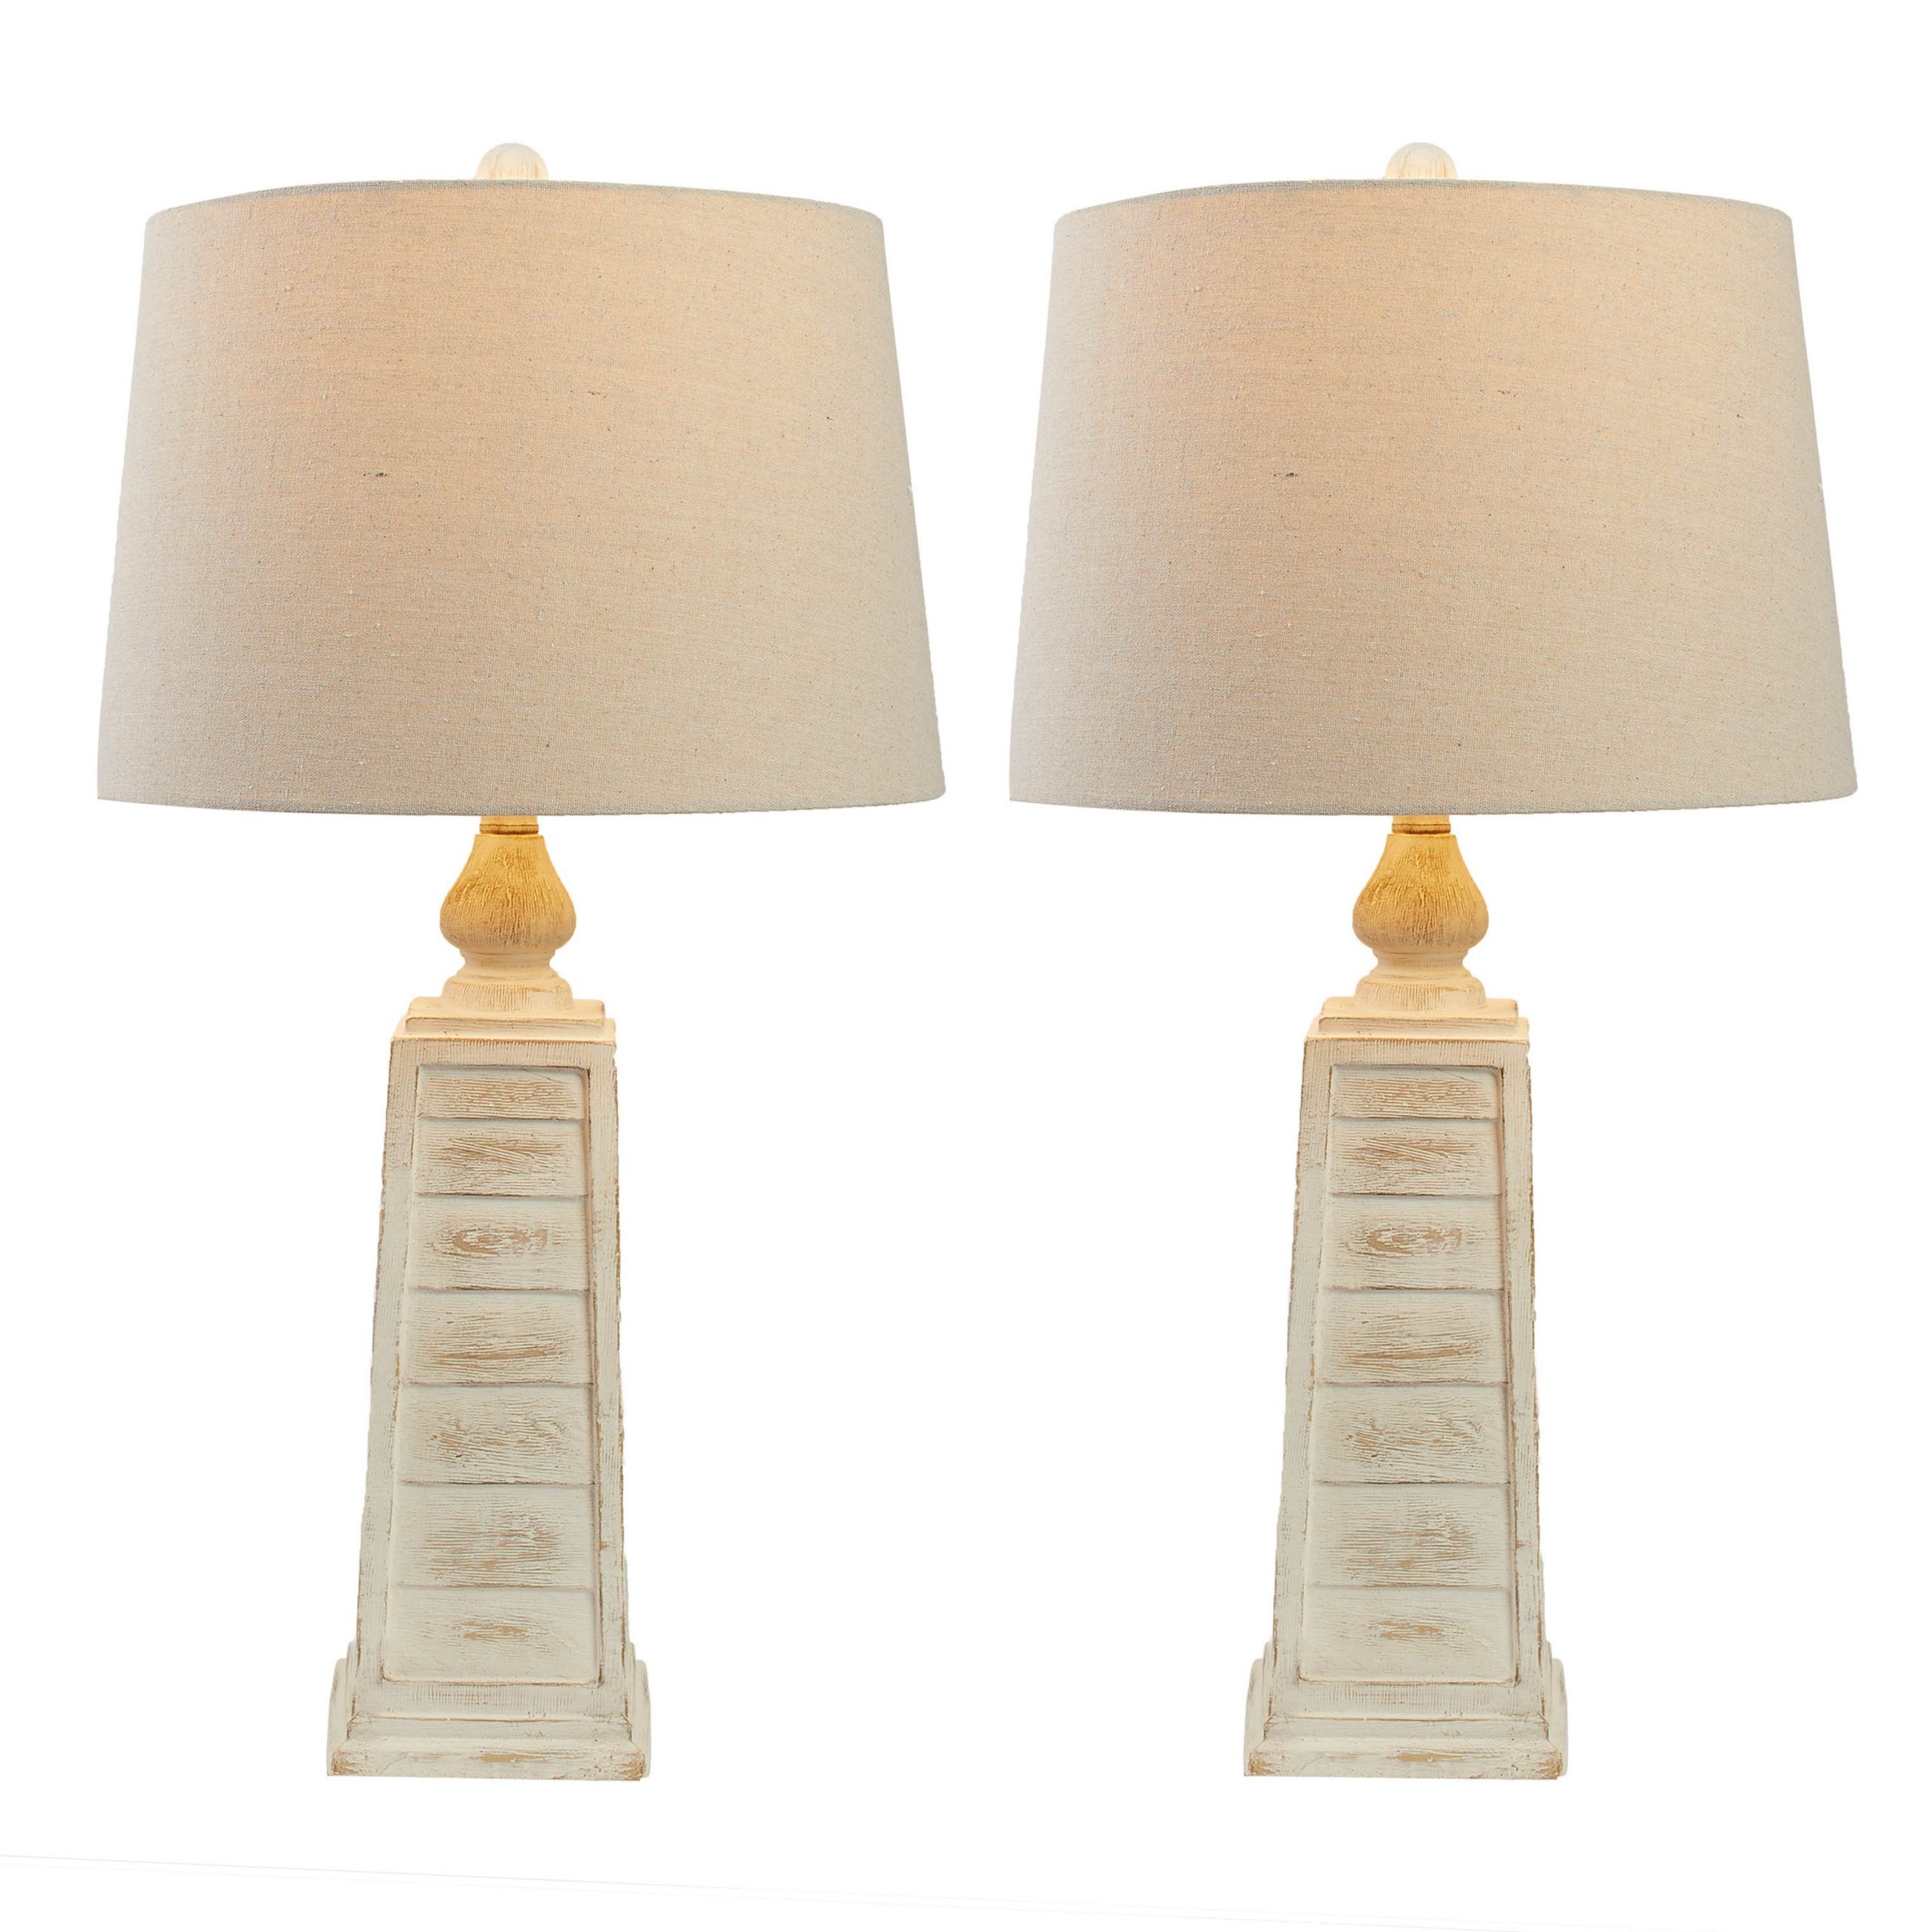 Weathered White Resin Table Lamp Oatmeal Linen Hardback Throughout Oatmeal Linen Shade Chandeliers (View 1 of 15)